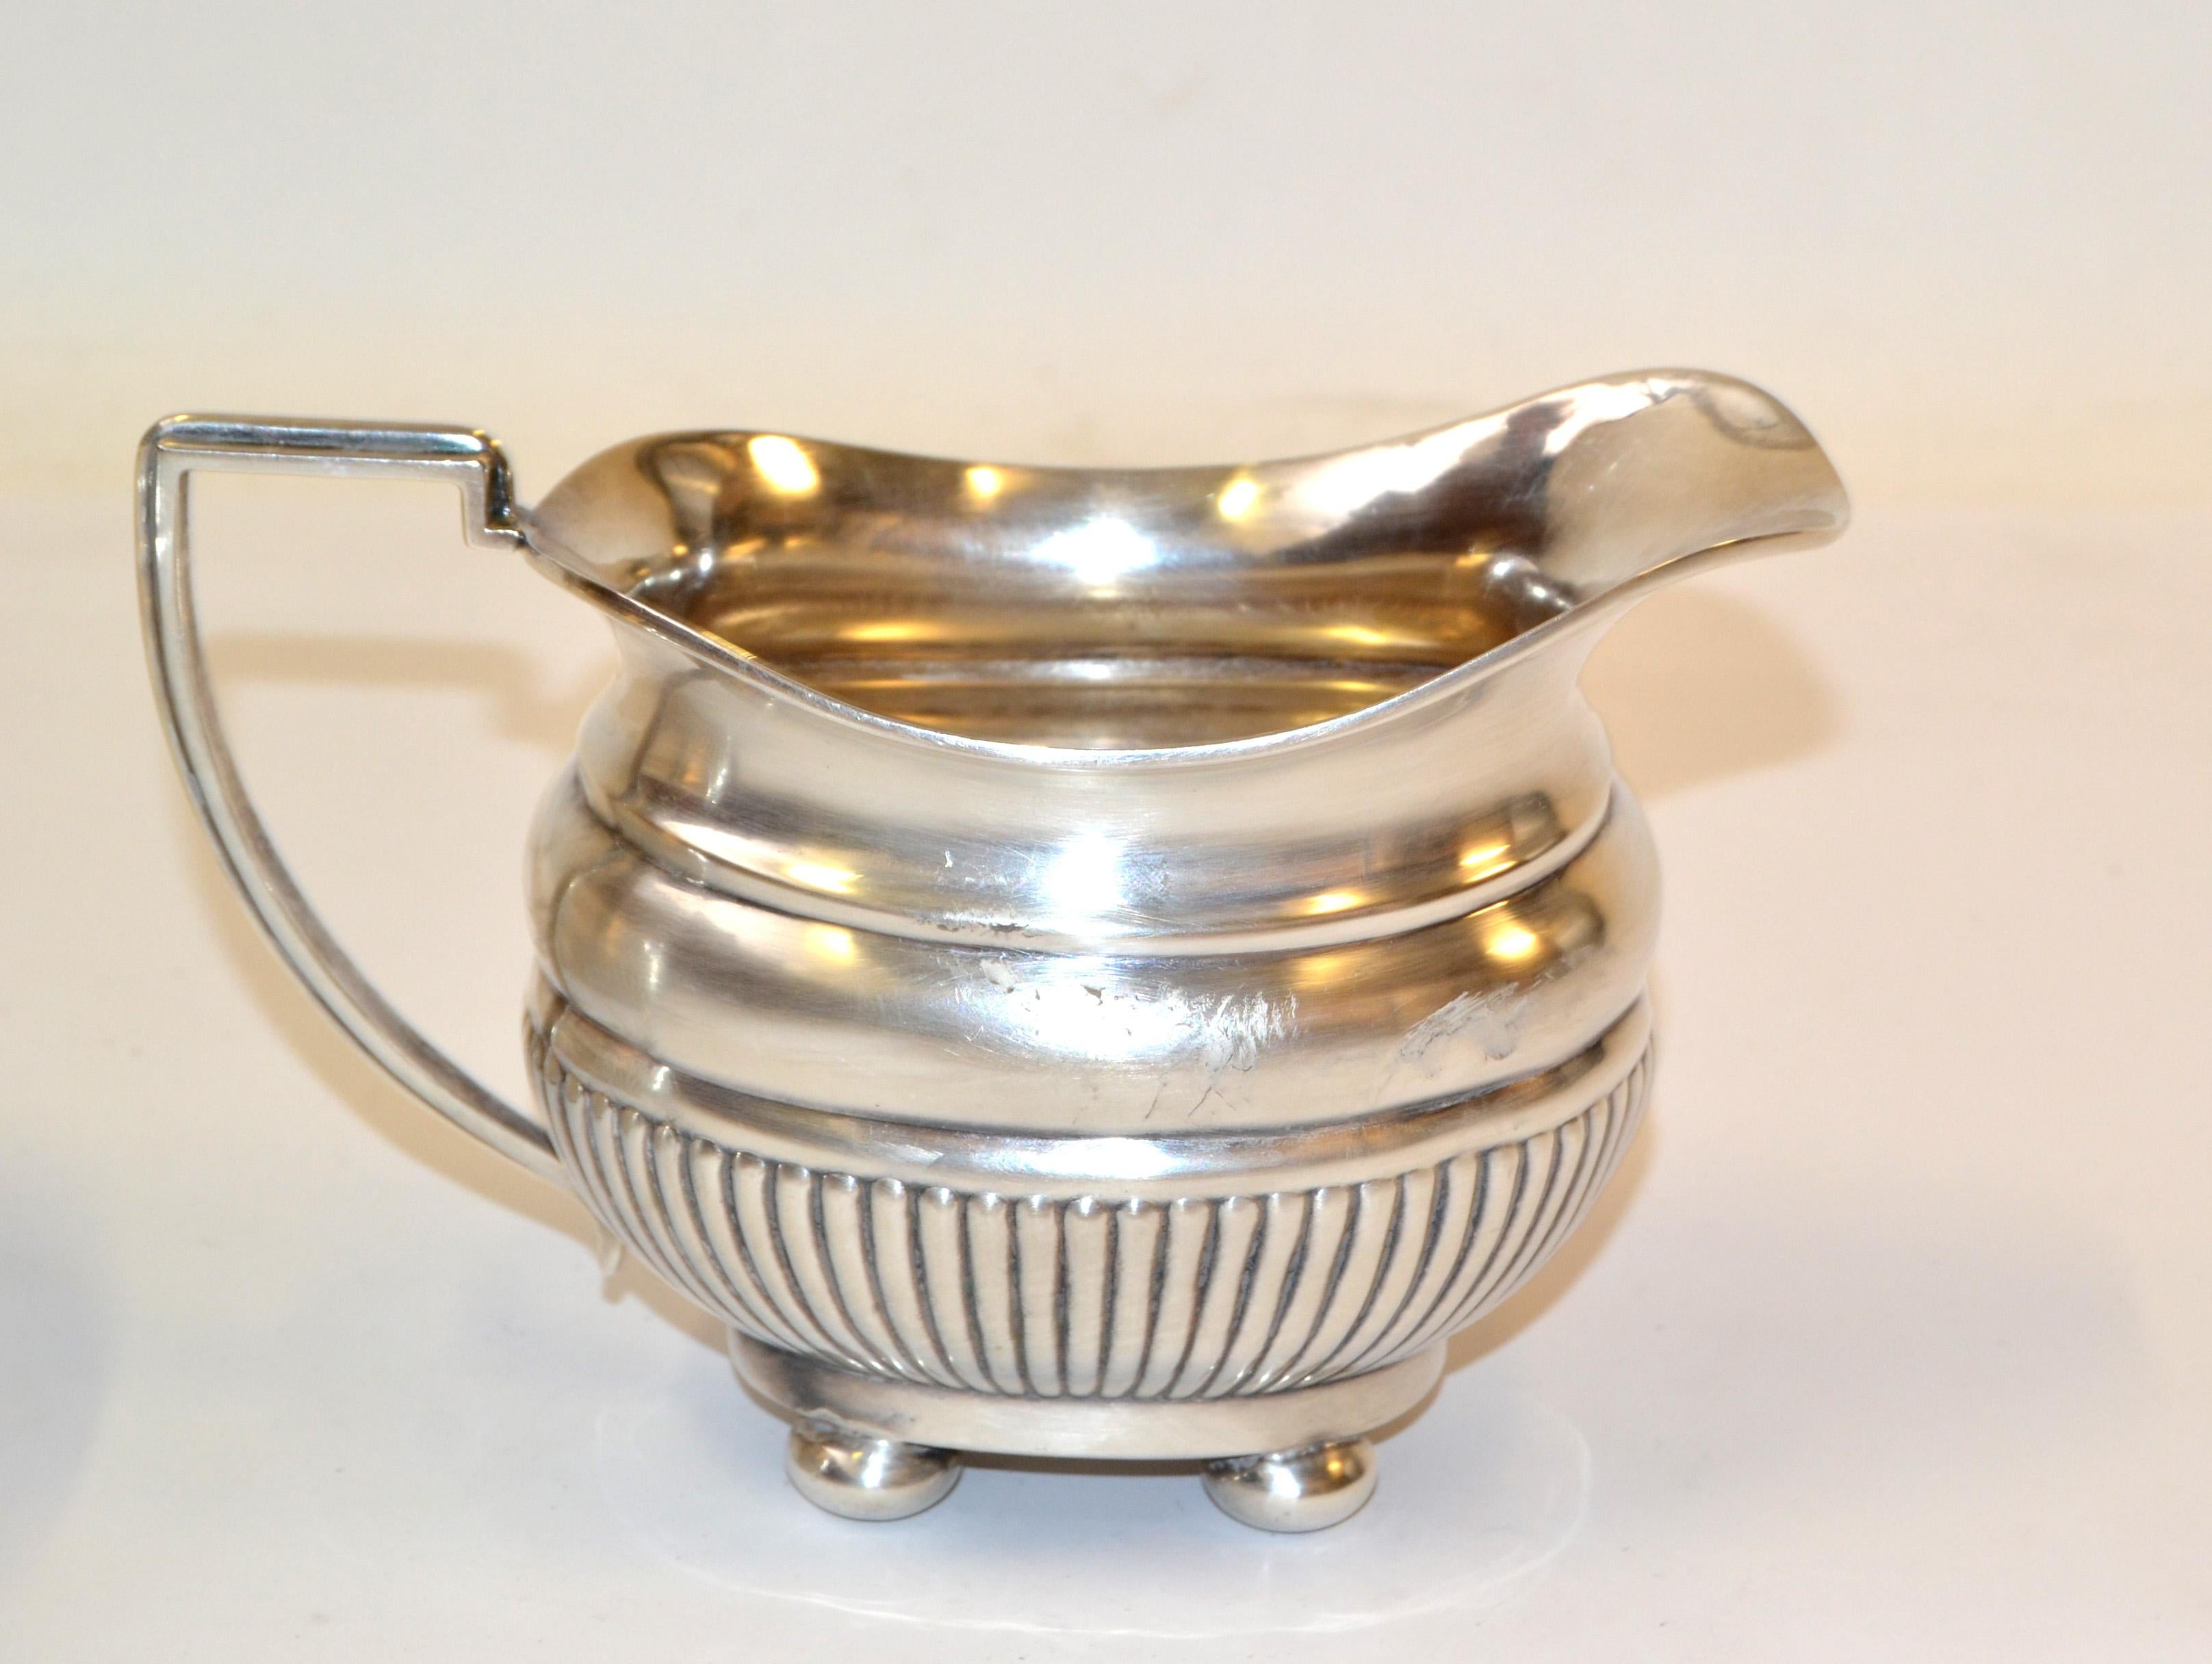 British Colonial Antique 1910 Cheltenham Silver Coffee Service Sheffield England For Sale 3